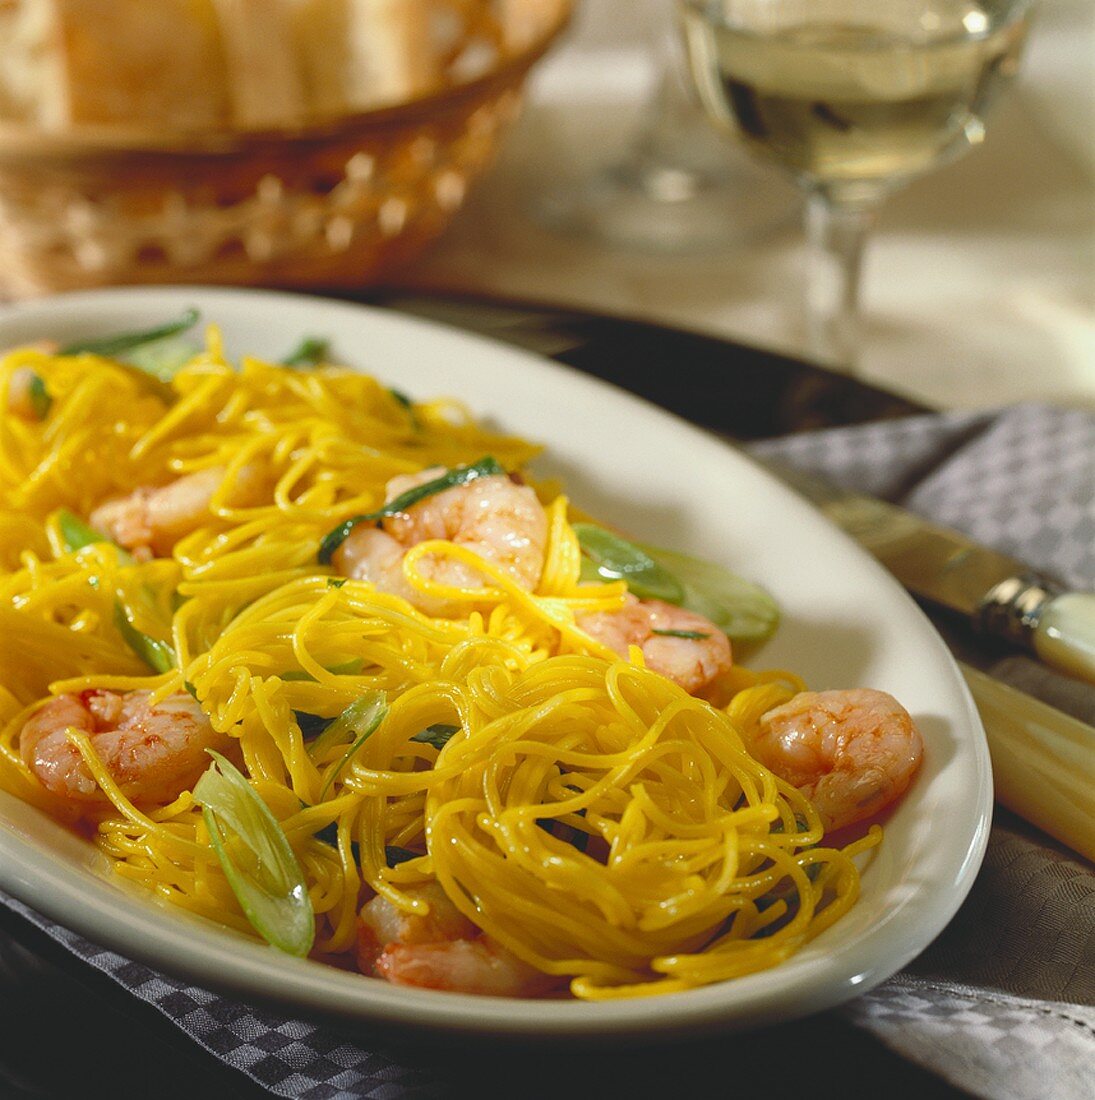 Pasta capelli d`angelo (angel's hair pasta) with prawns